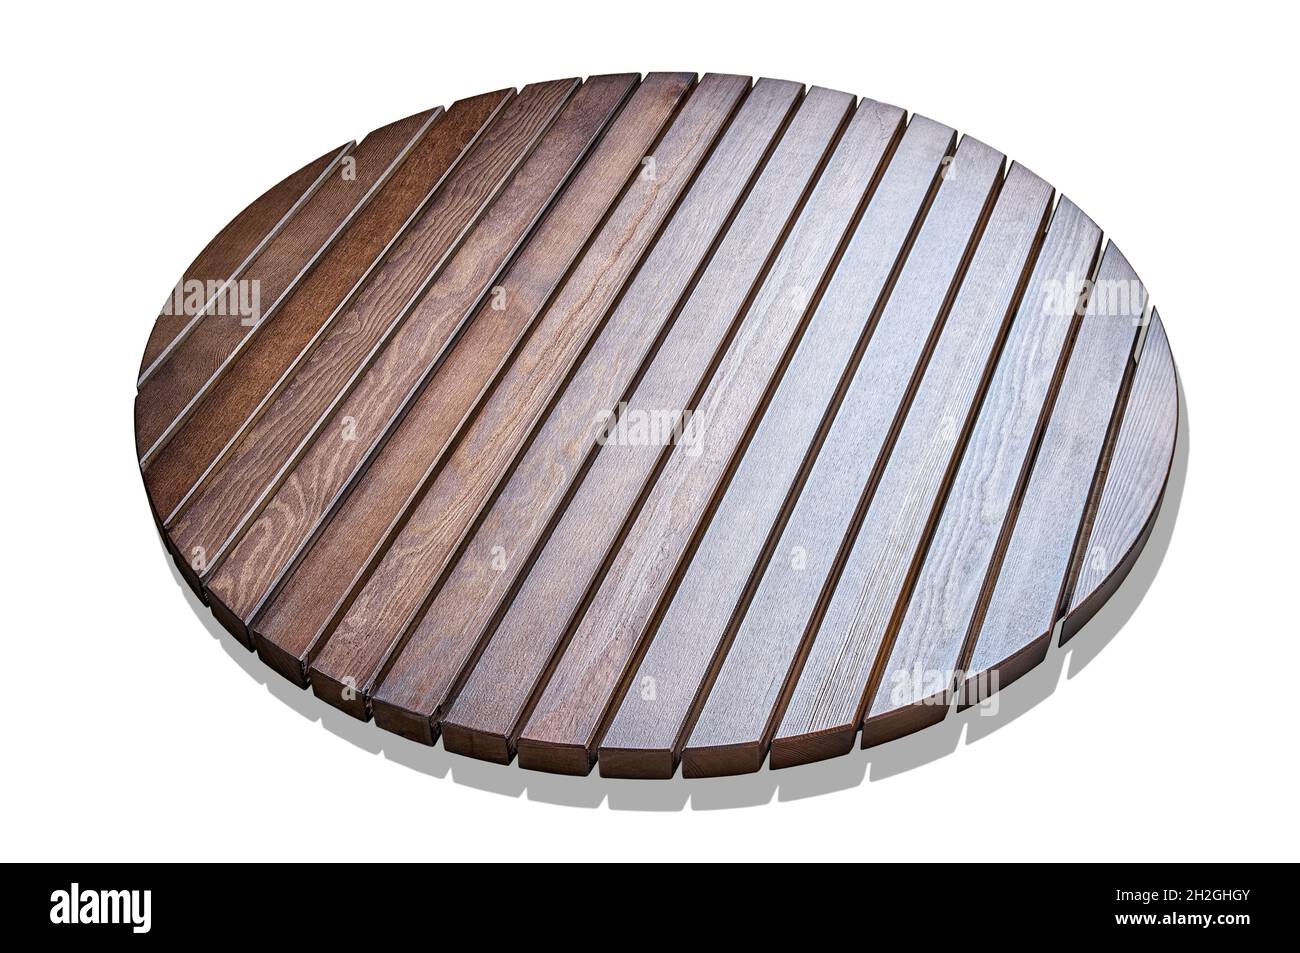 Round table top made of wooden slats for outdoor table isolated on white background upper view Stock Photo